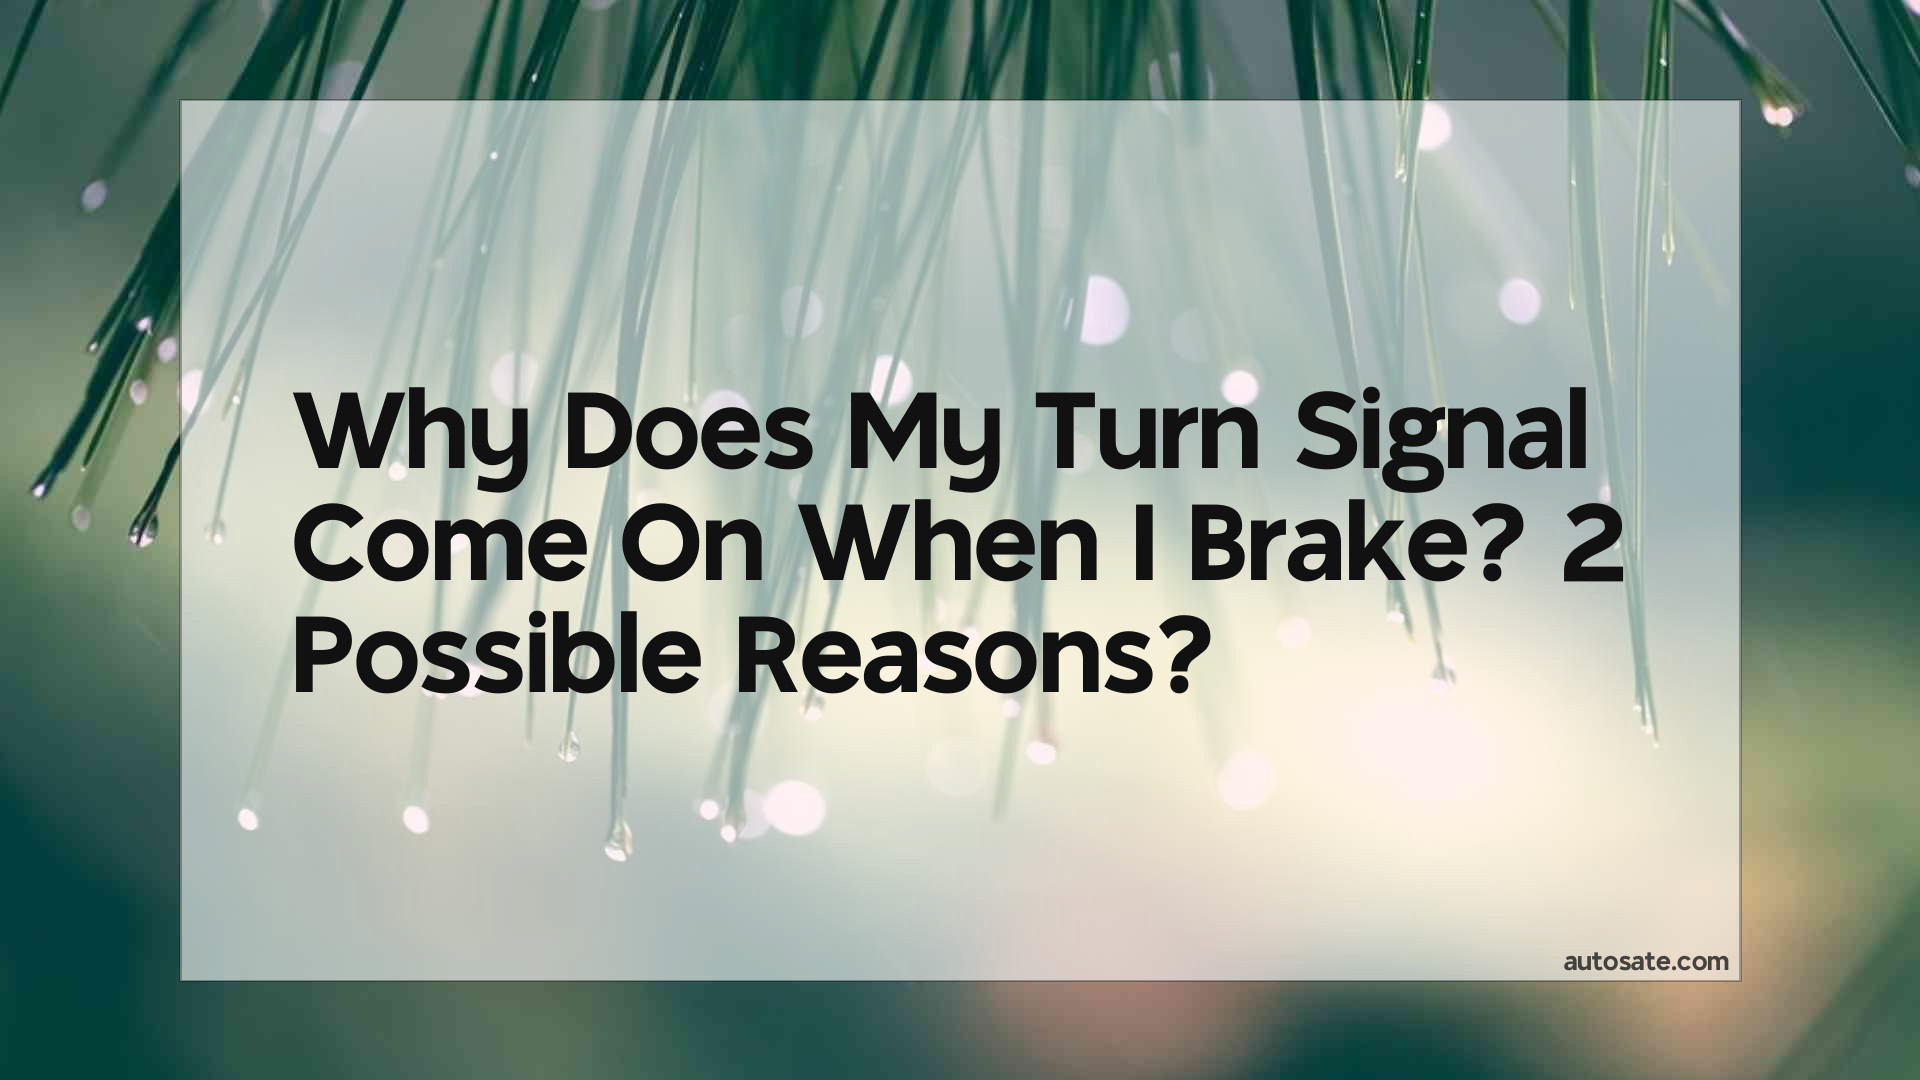 Why Does My Turn Signal Come On When I Brake? 2 Possible Reasons